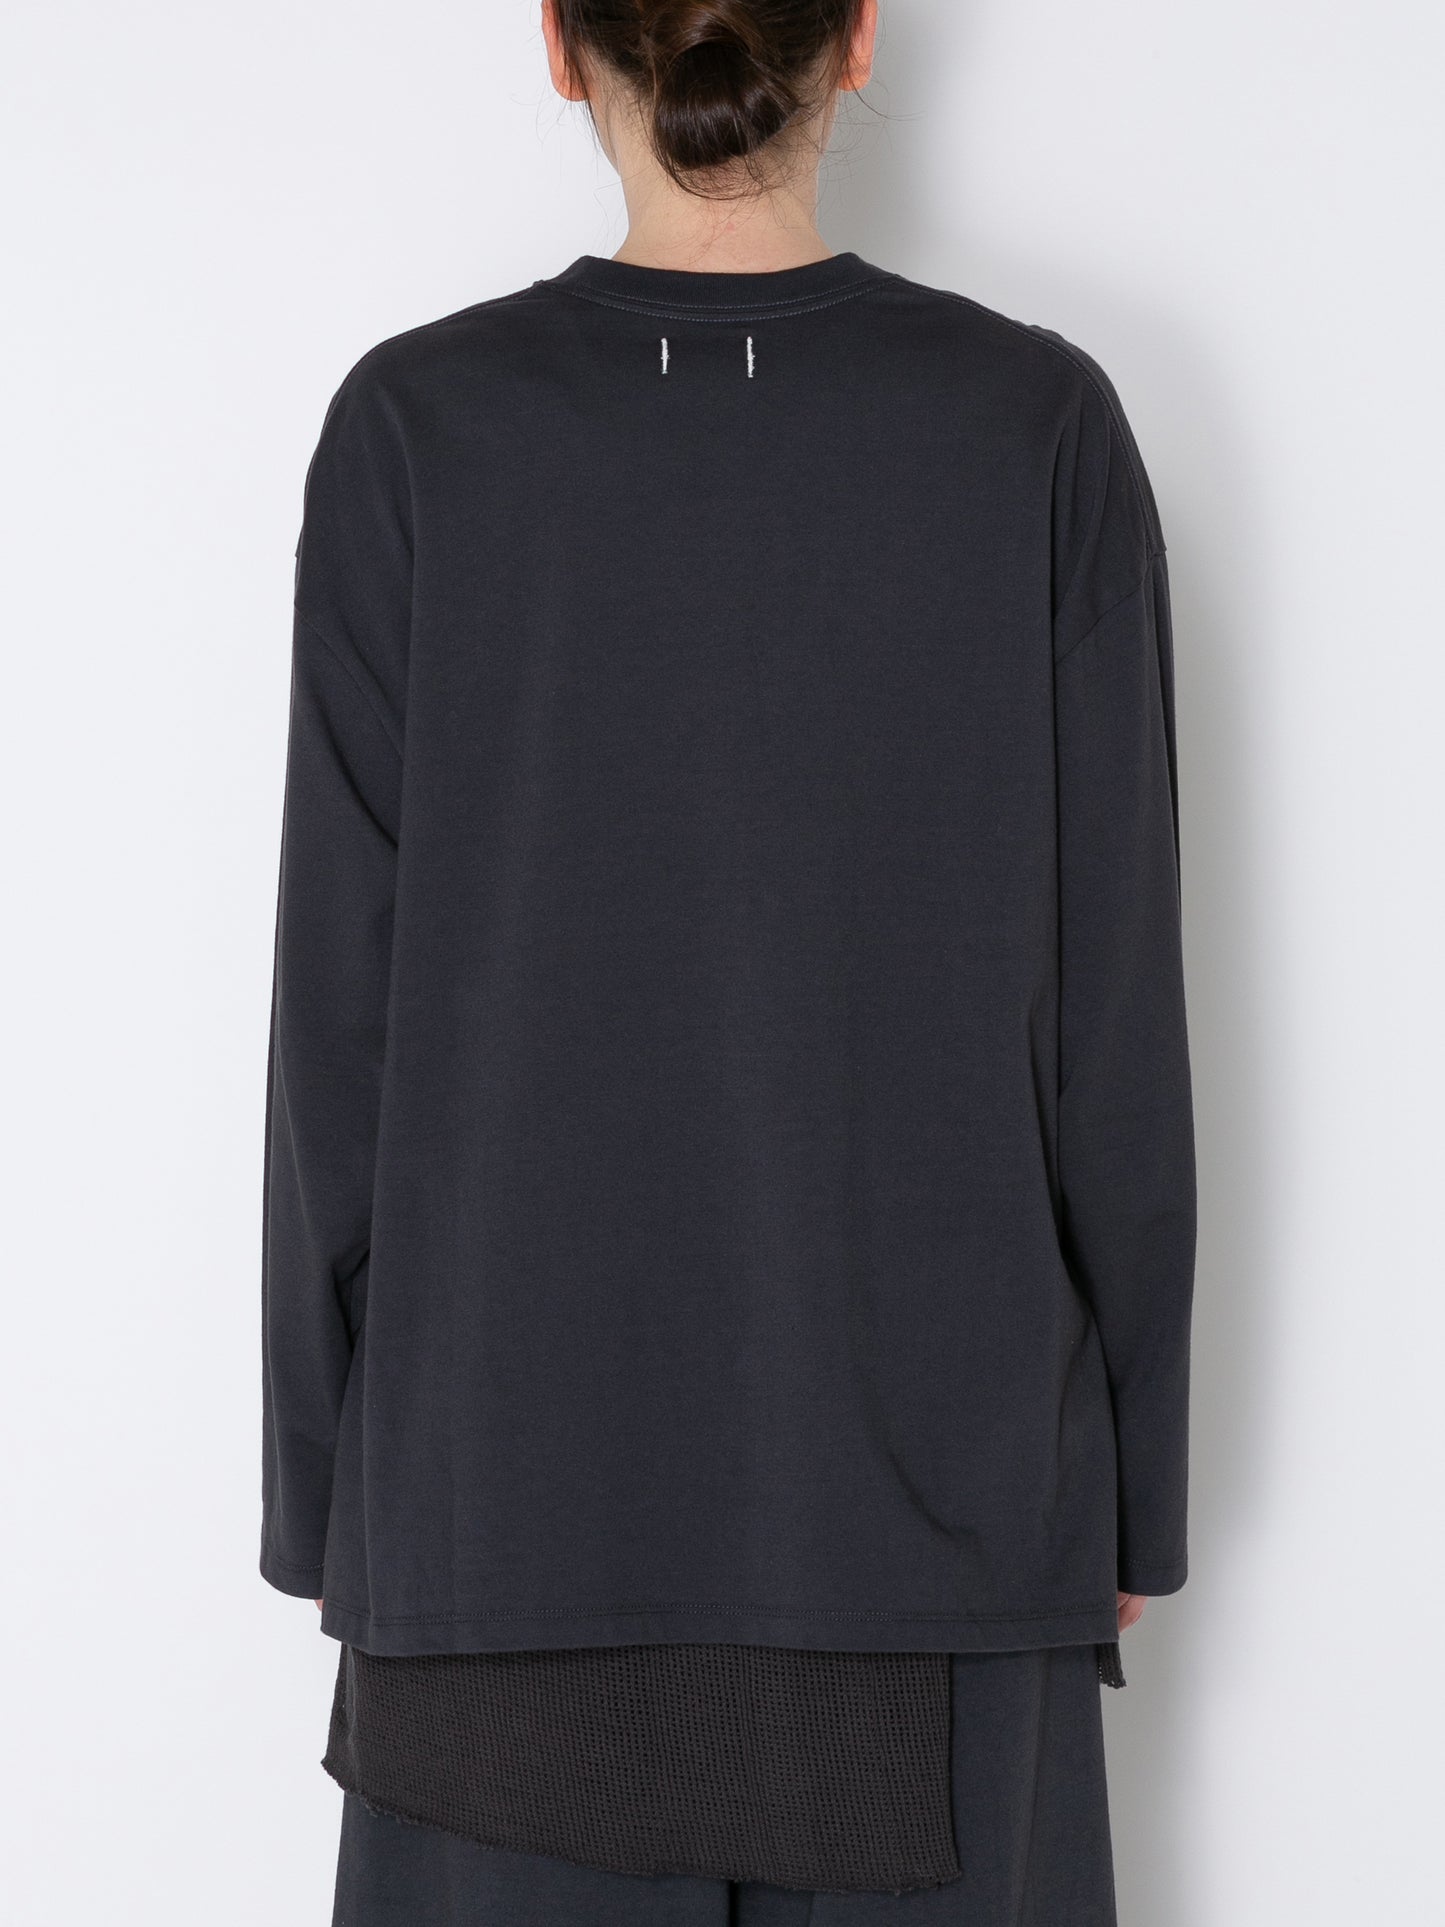 BAGGY L/S TEE ORGANIC COTTON JERSEY AM-C0003 Charcoal